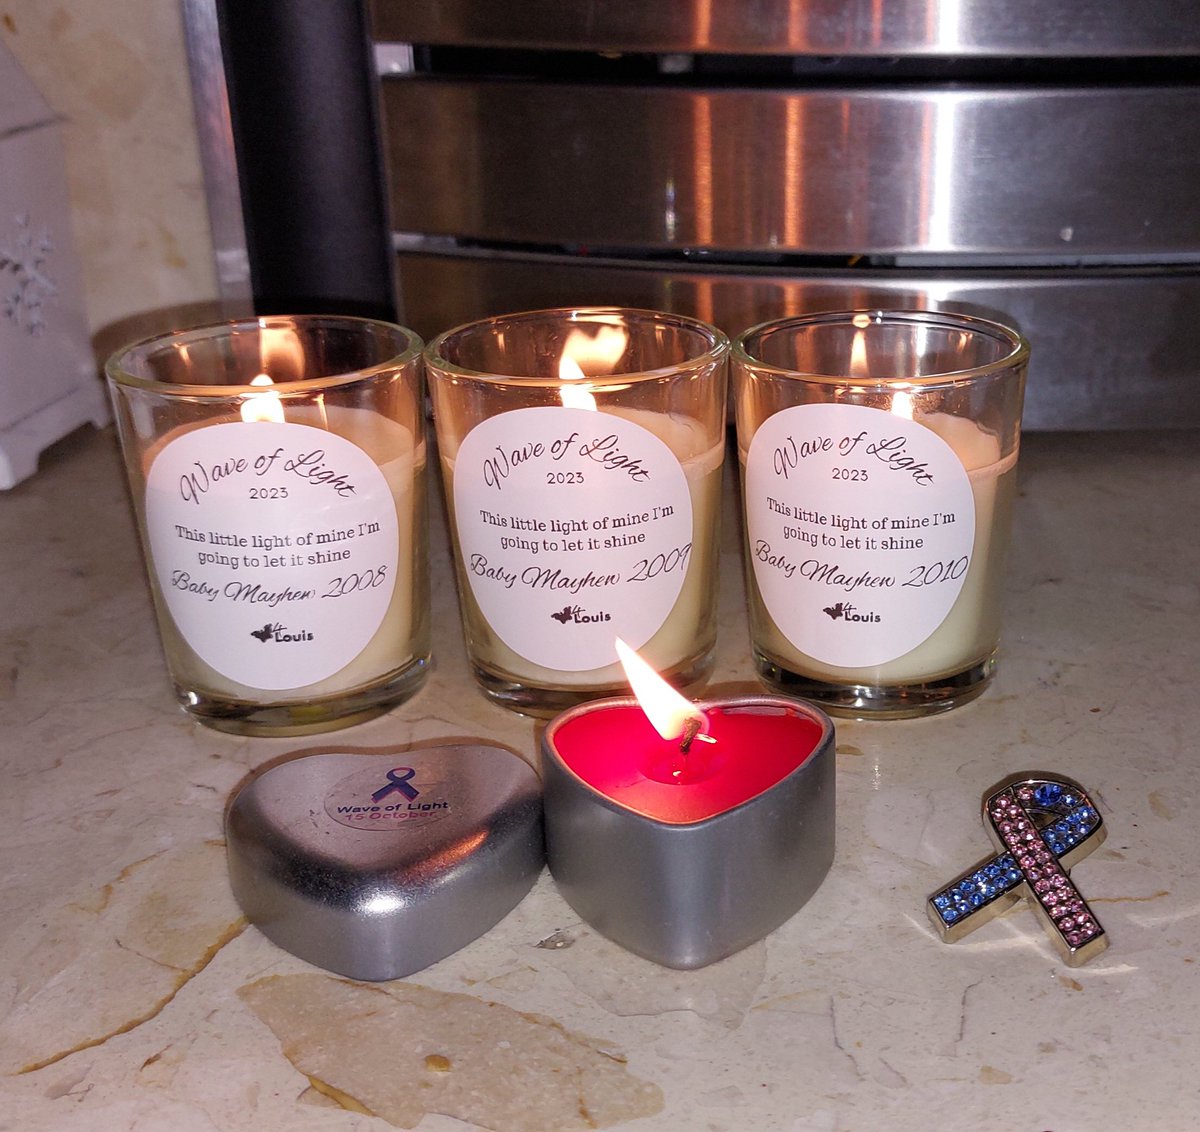 @_4Louis Lit for the 3 babies we never got to meet. Thank you so much for my candles @_4Louis

#BabyLossAwarenessWeek 
#waveoflight2023
#recurrentmiscarriage 
#iam1in4